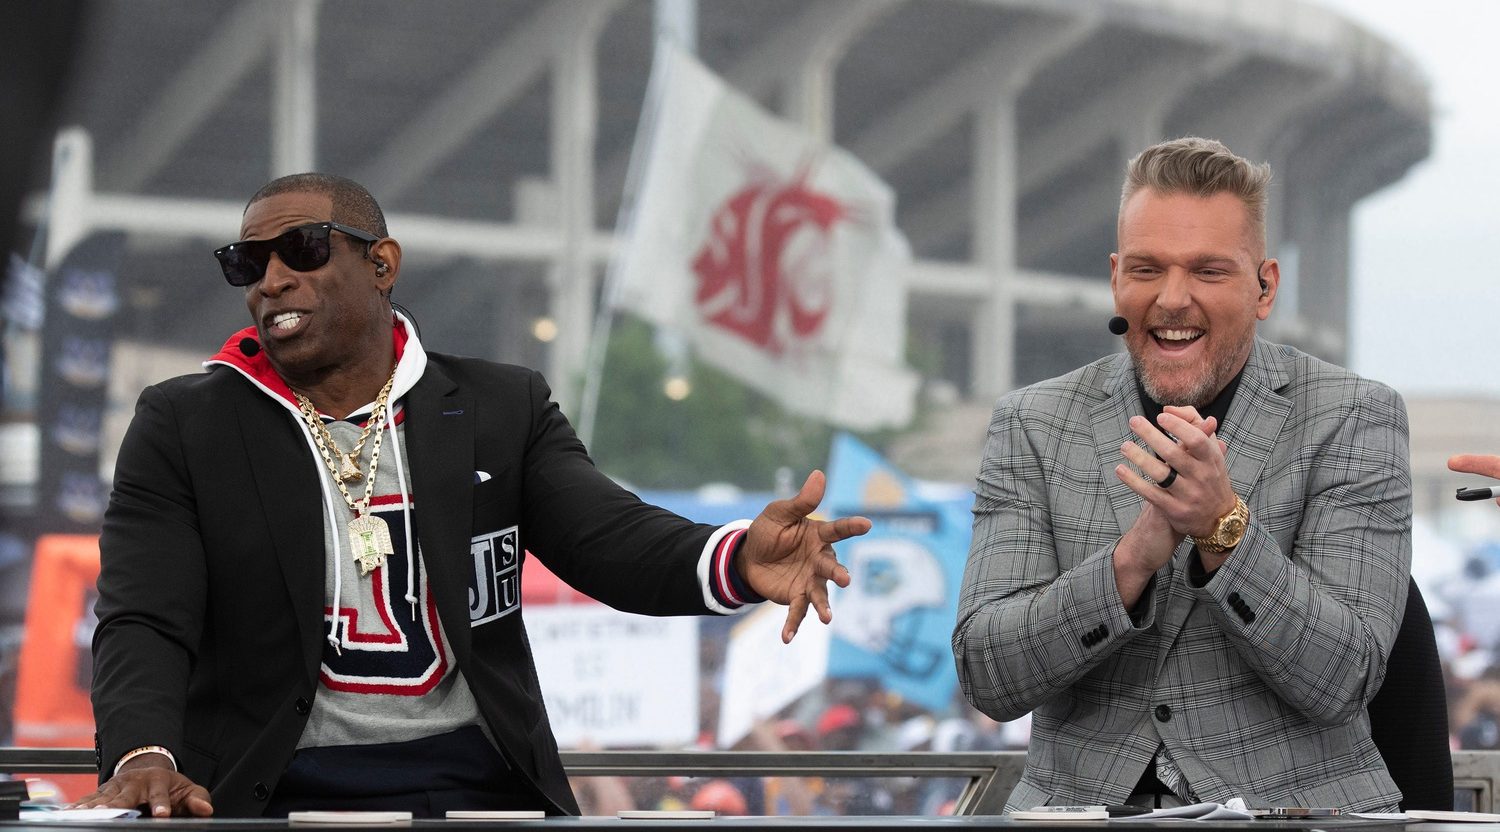 Pat McAfee reacts to Jackson State head coach Deion Sanders, left, while live on ESPN College GameDay before the Jackson State University vs. Southern game at Jackson Miss., Saturday, Oct. 29, 2022.